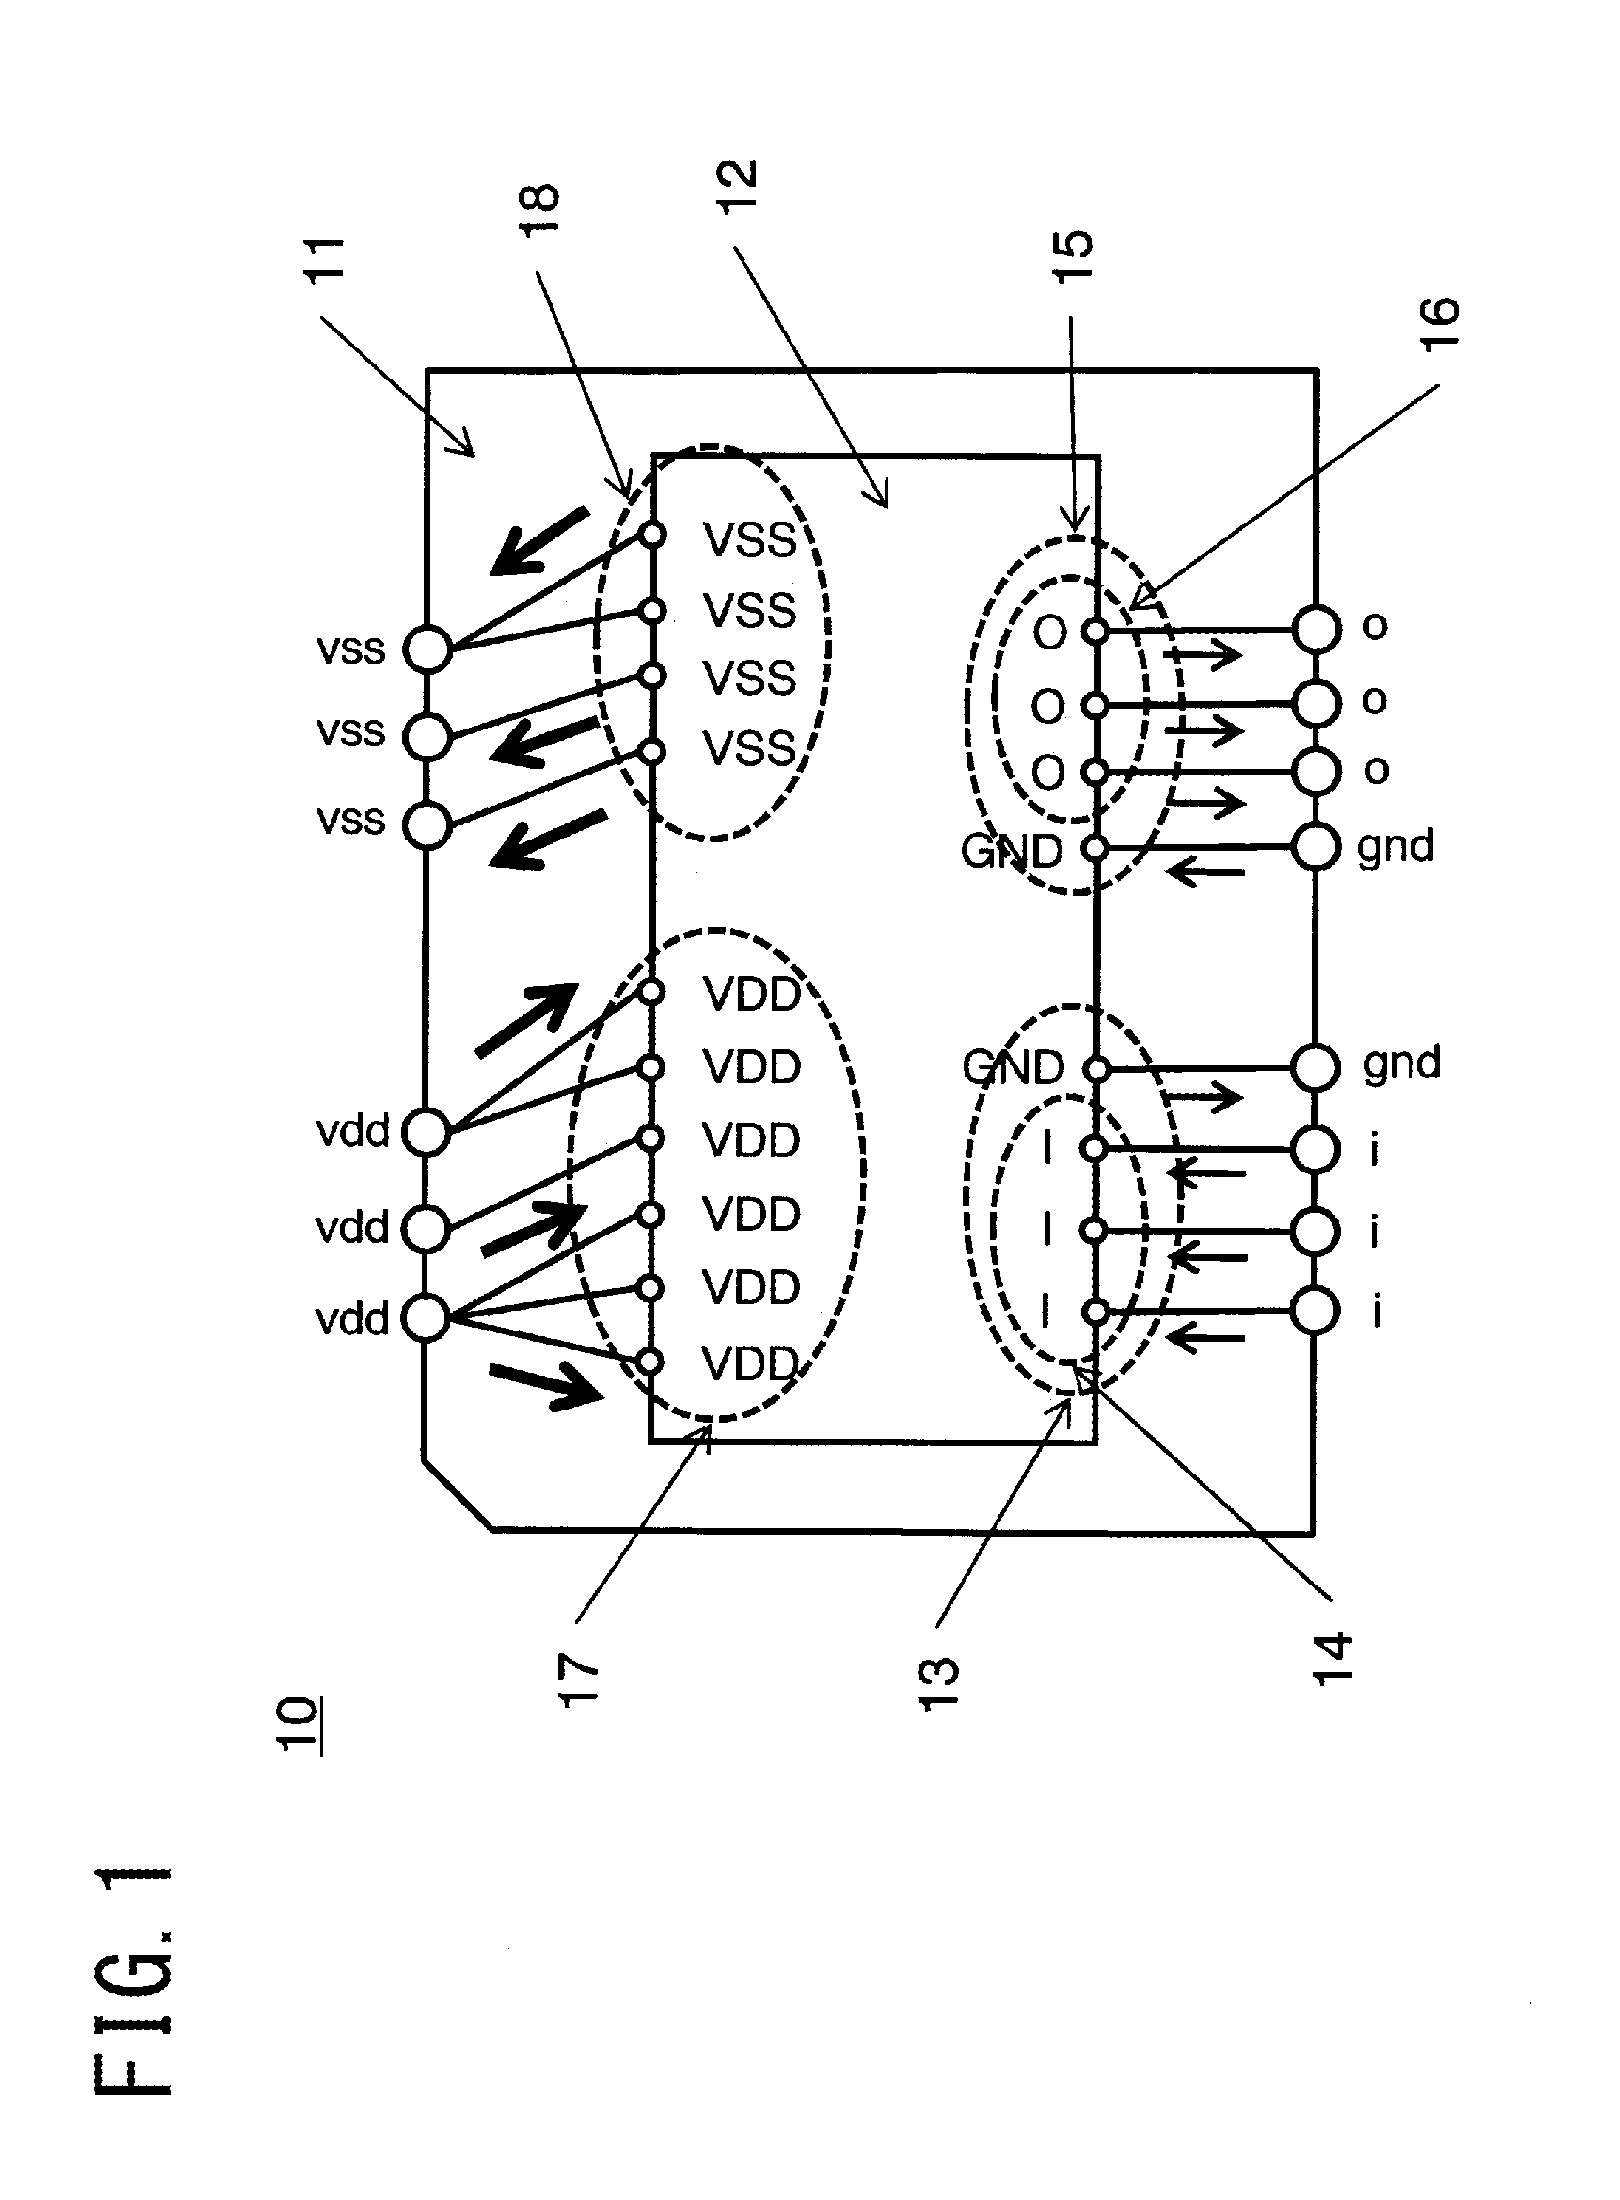 Semiconductor  module carrying the same